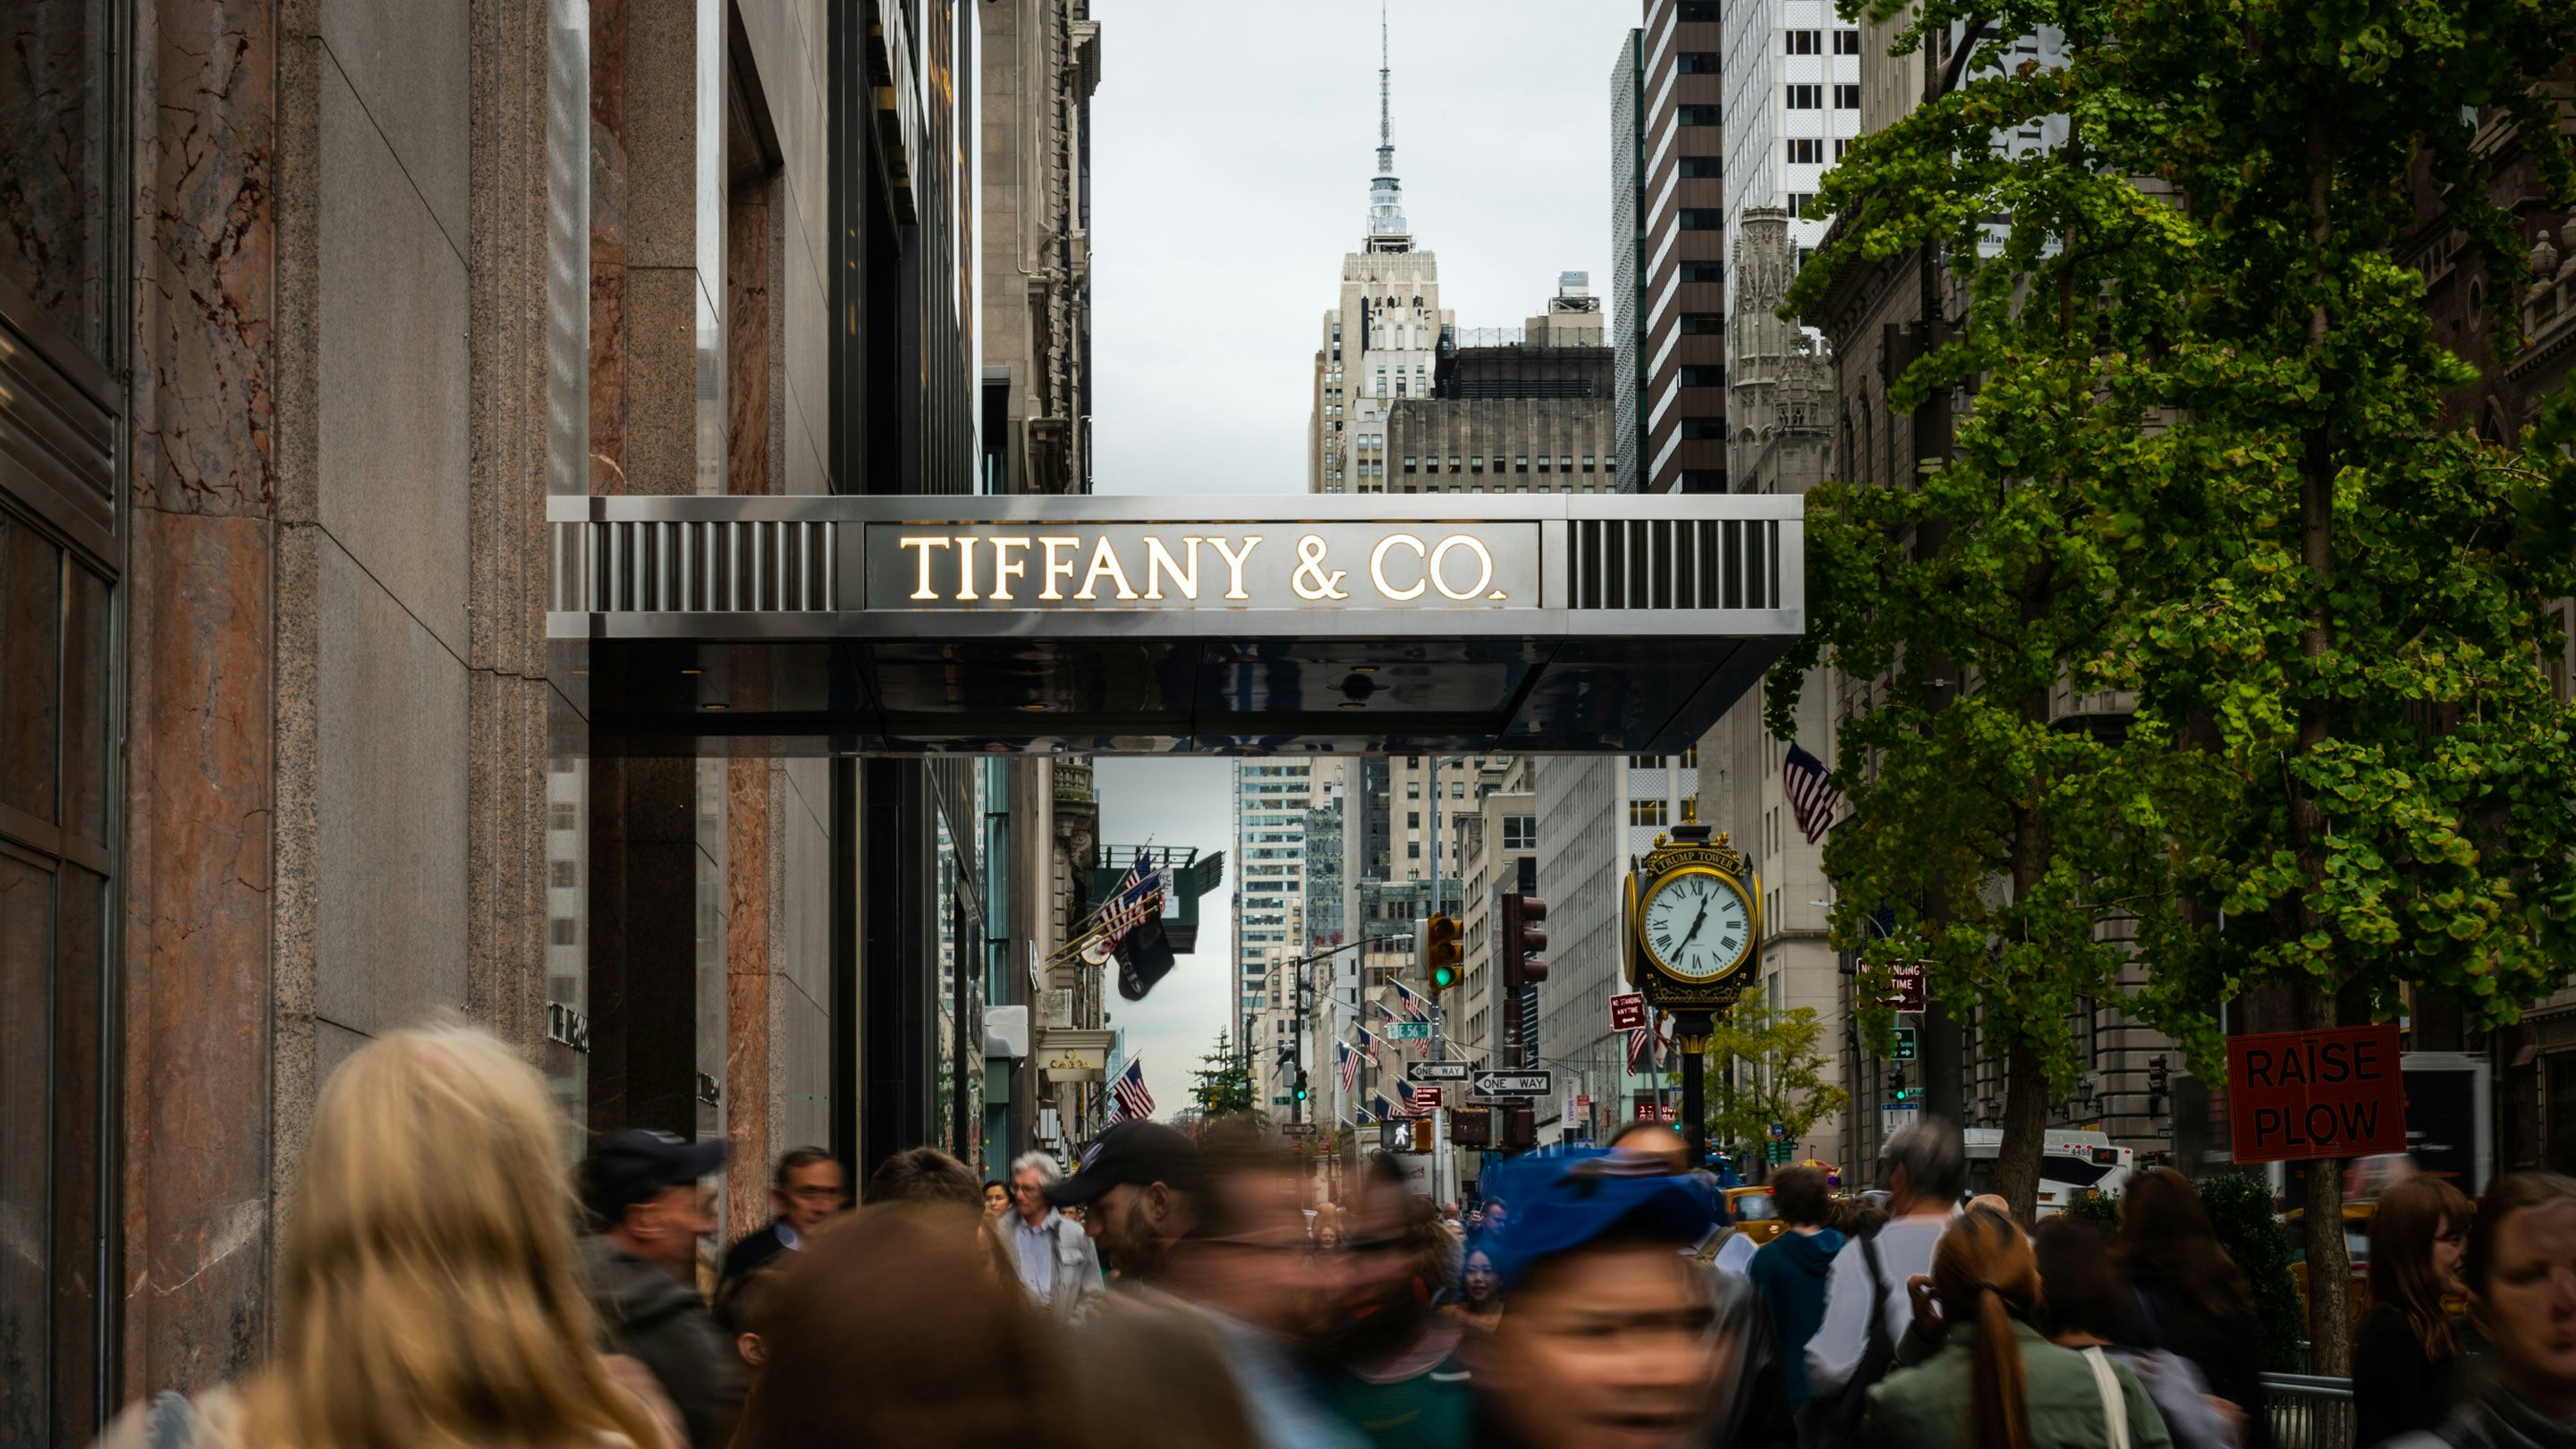 How Tiffany's new owner, LVMH, became the biggest luxury seller